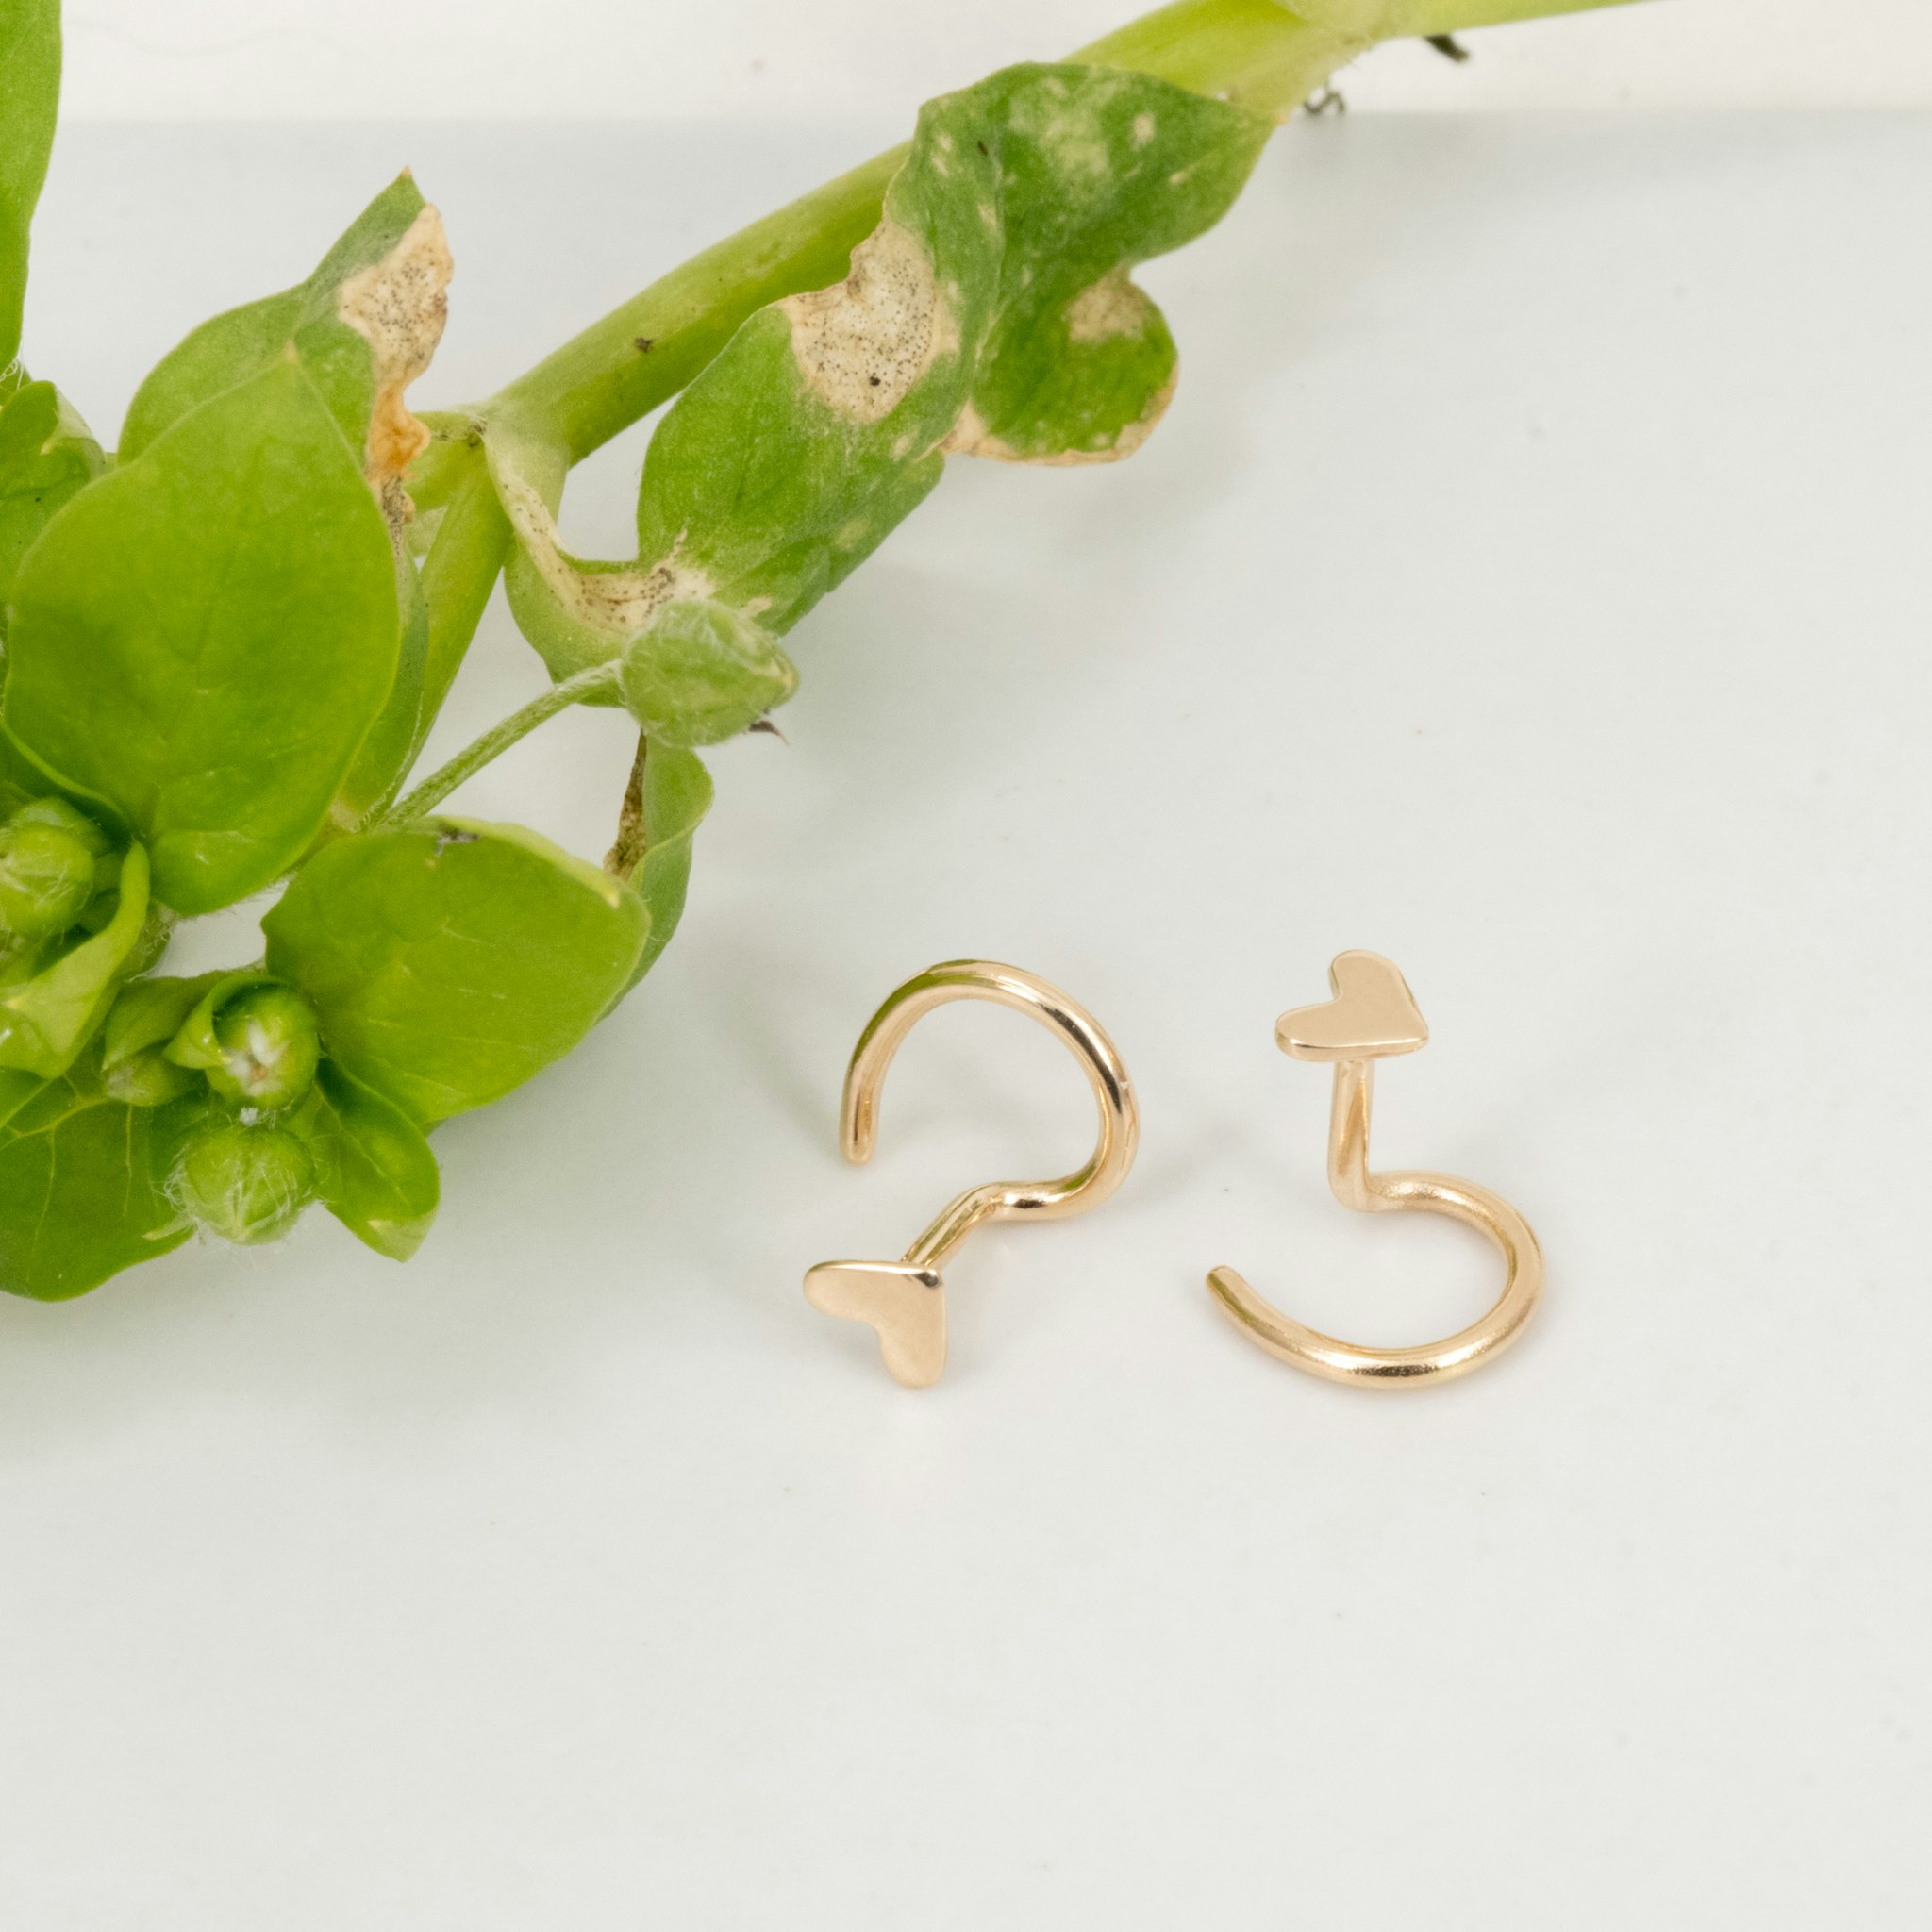 18K Micro Hearts Comfort Earrings in Recycled Gold